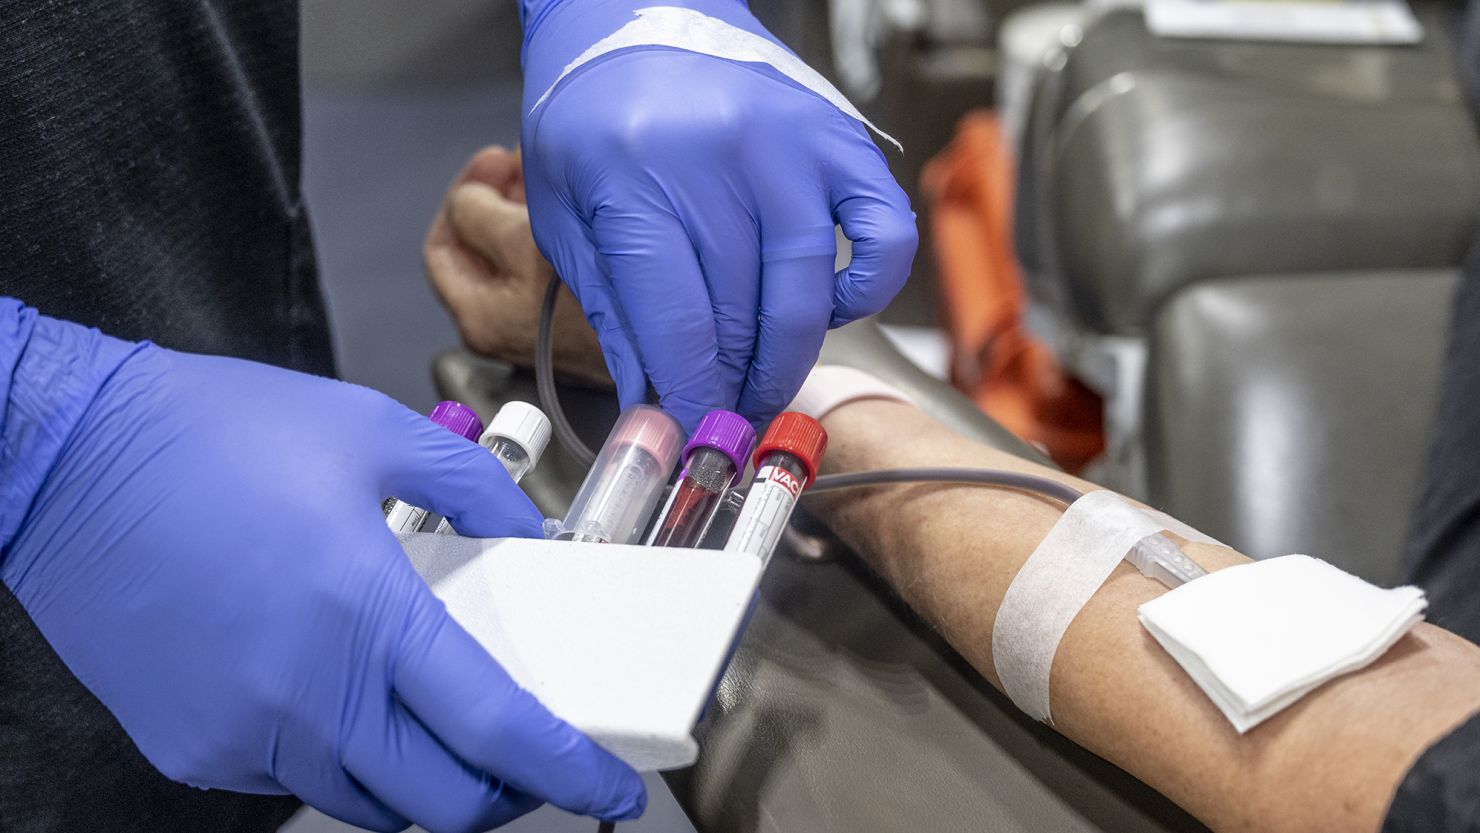 Fullerton, CA - January 20: A nurse fills test tubes with blood to be tested during an American Red Cross bloodmobile in Fullerton, CA on Thursday, January 20, 2022.